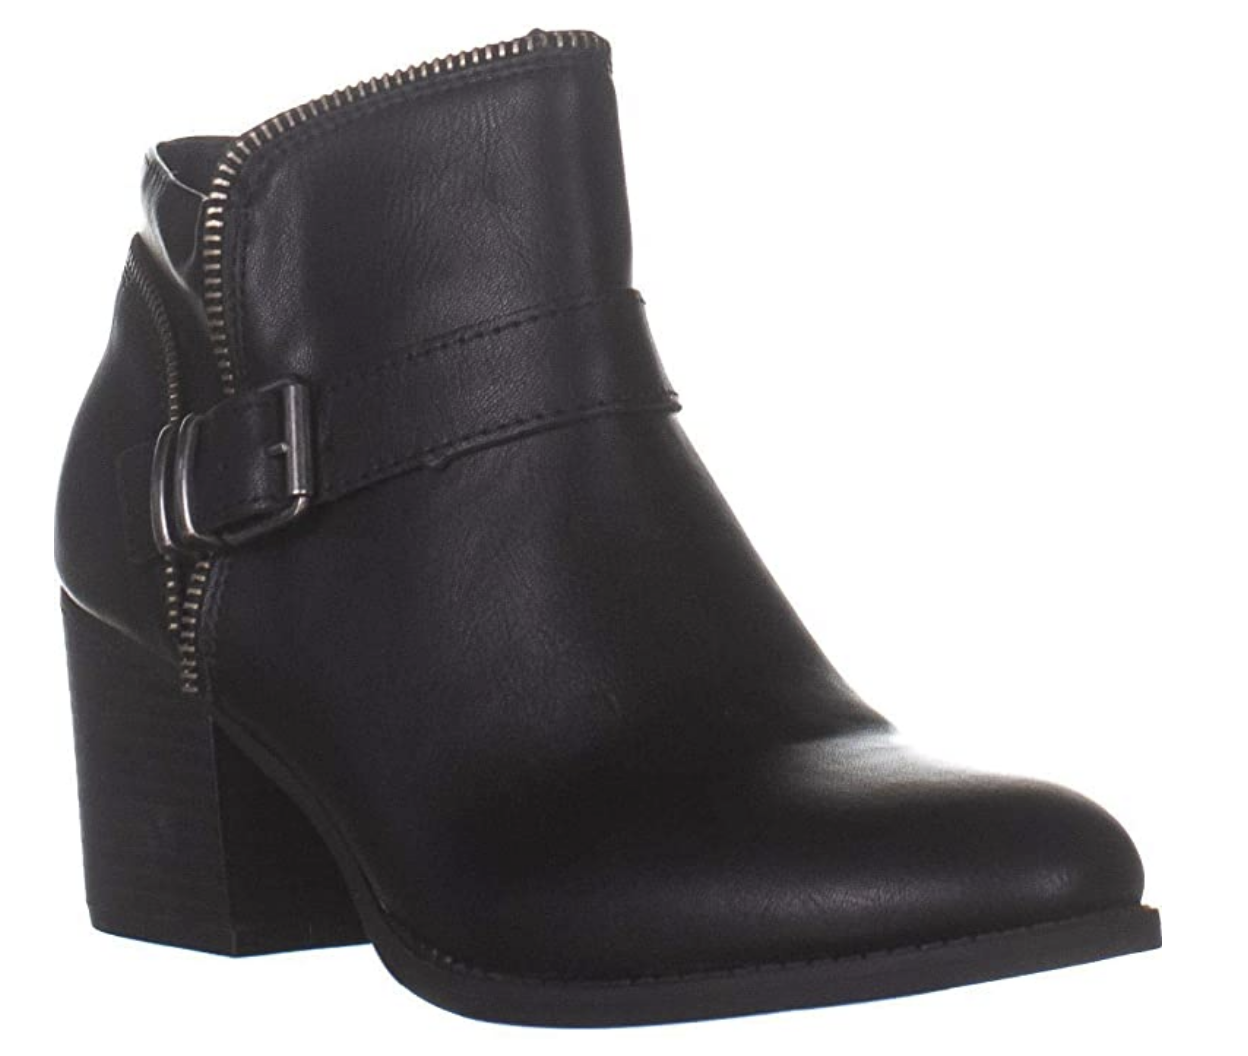 American Rag Womens Milly Almond Toe Ankle Fashion Boots Color: Black  Size: 8.5 M